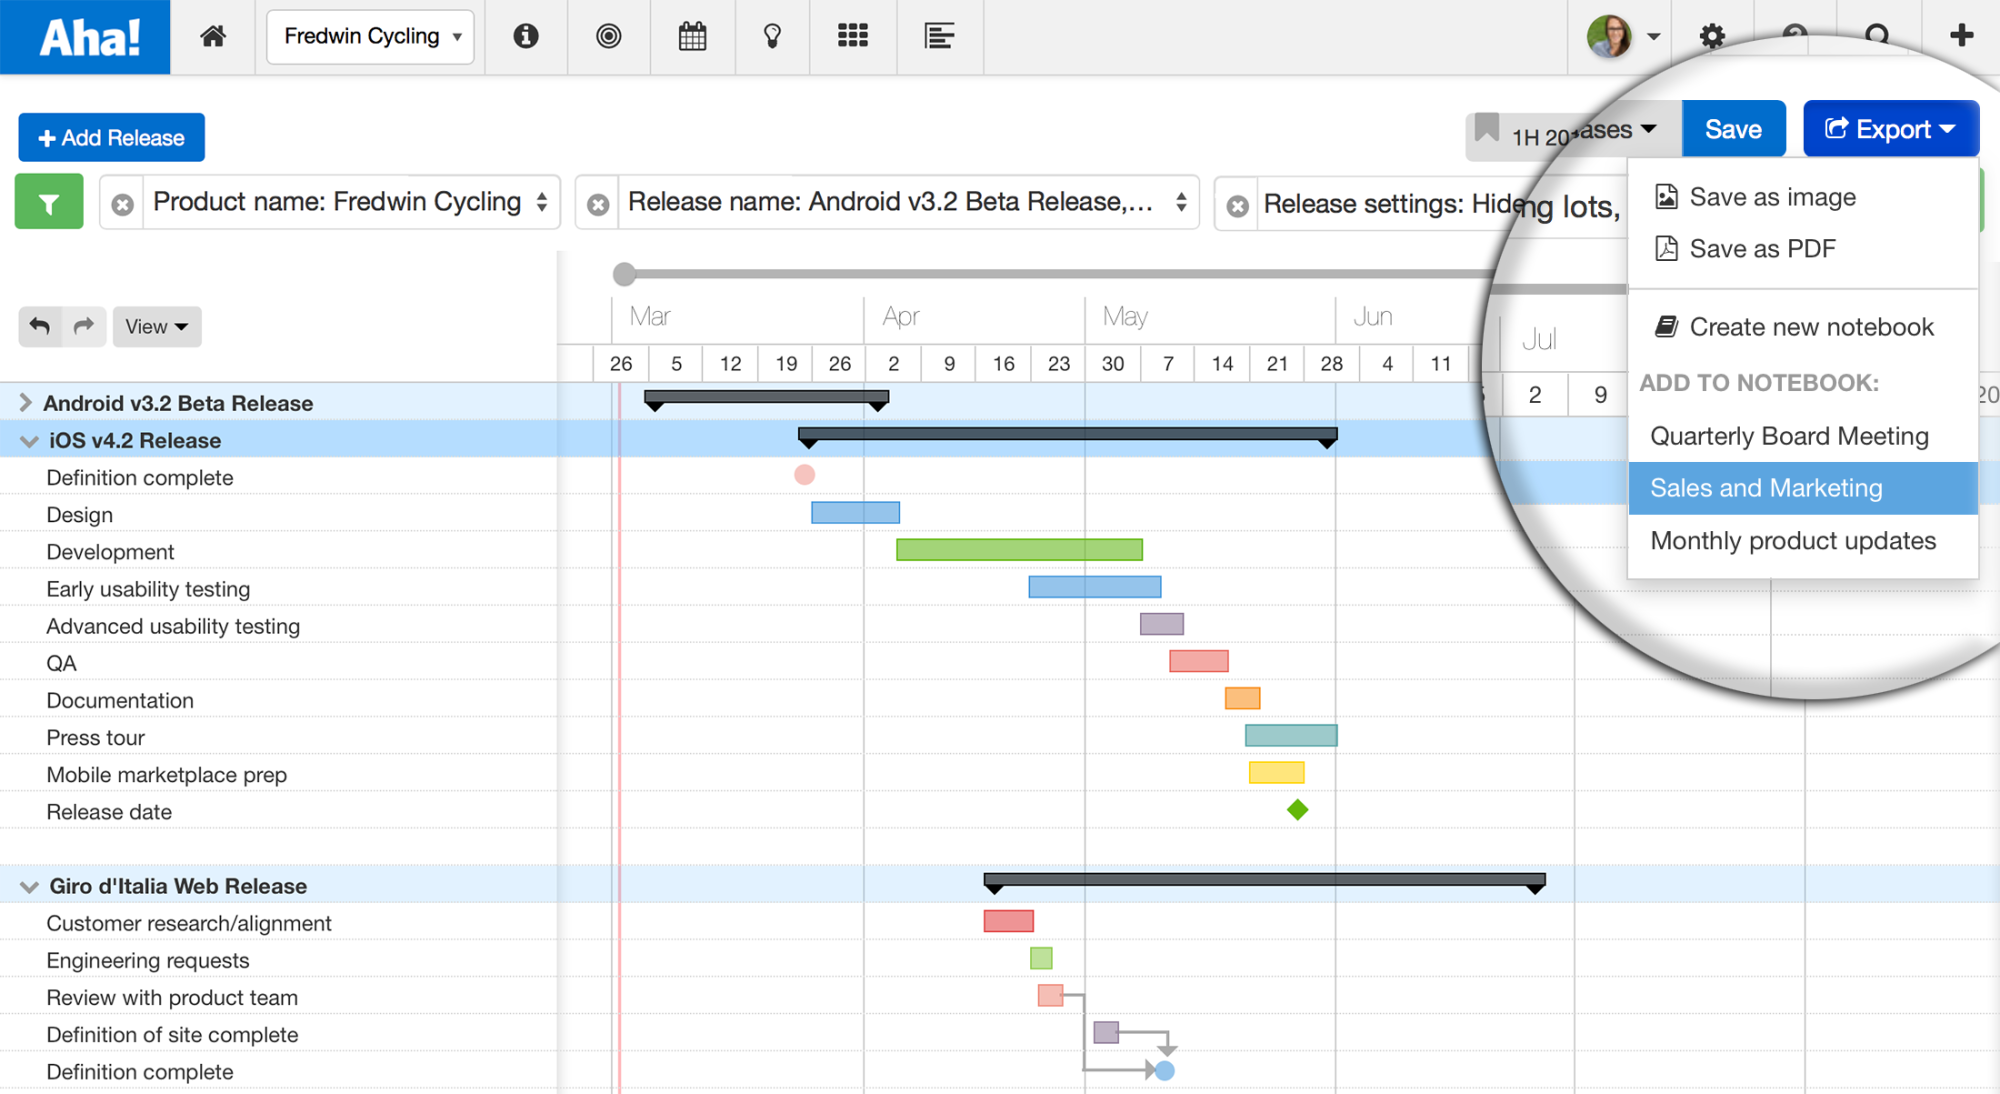 Just Launched! — Visualize Your Release Schedules | Aha!